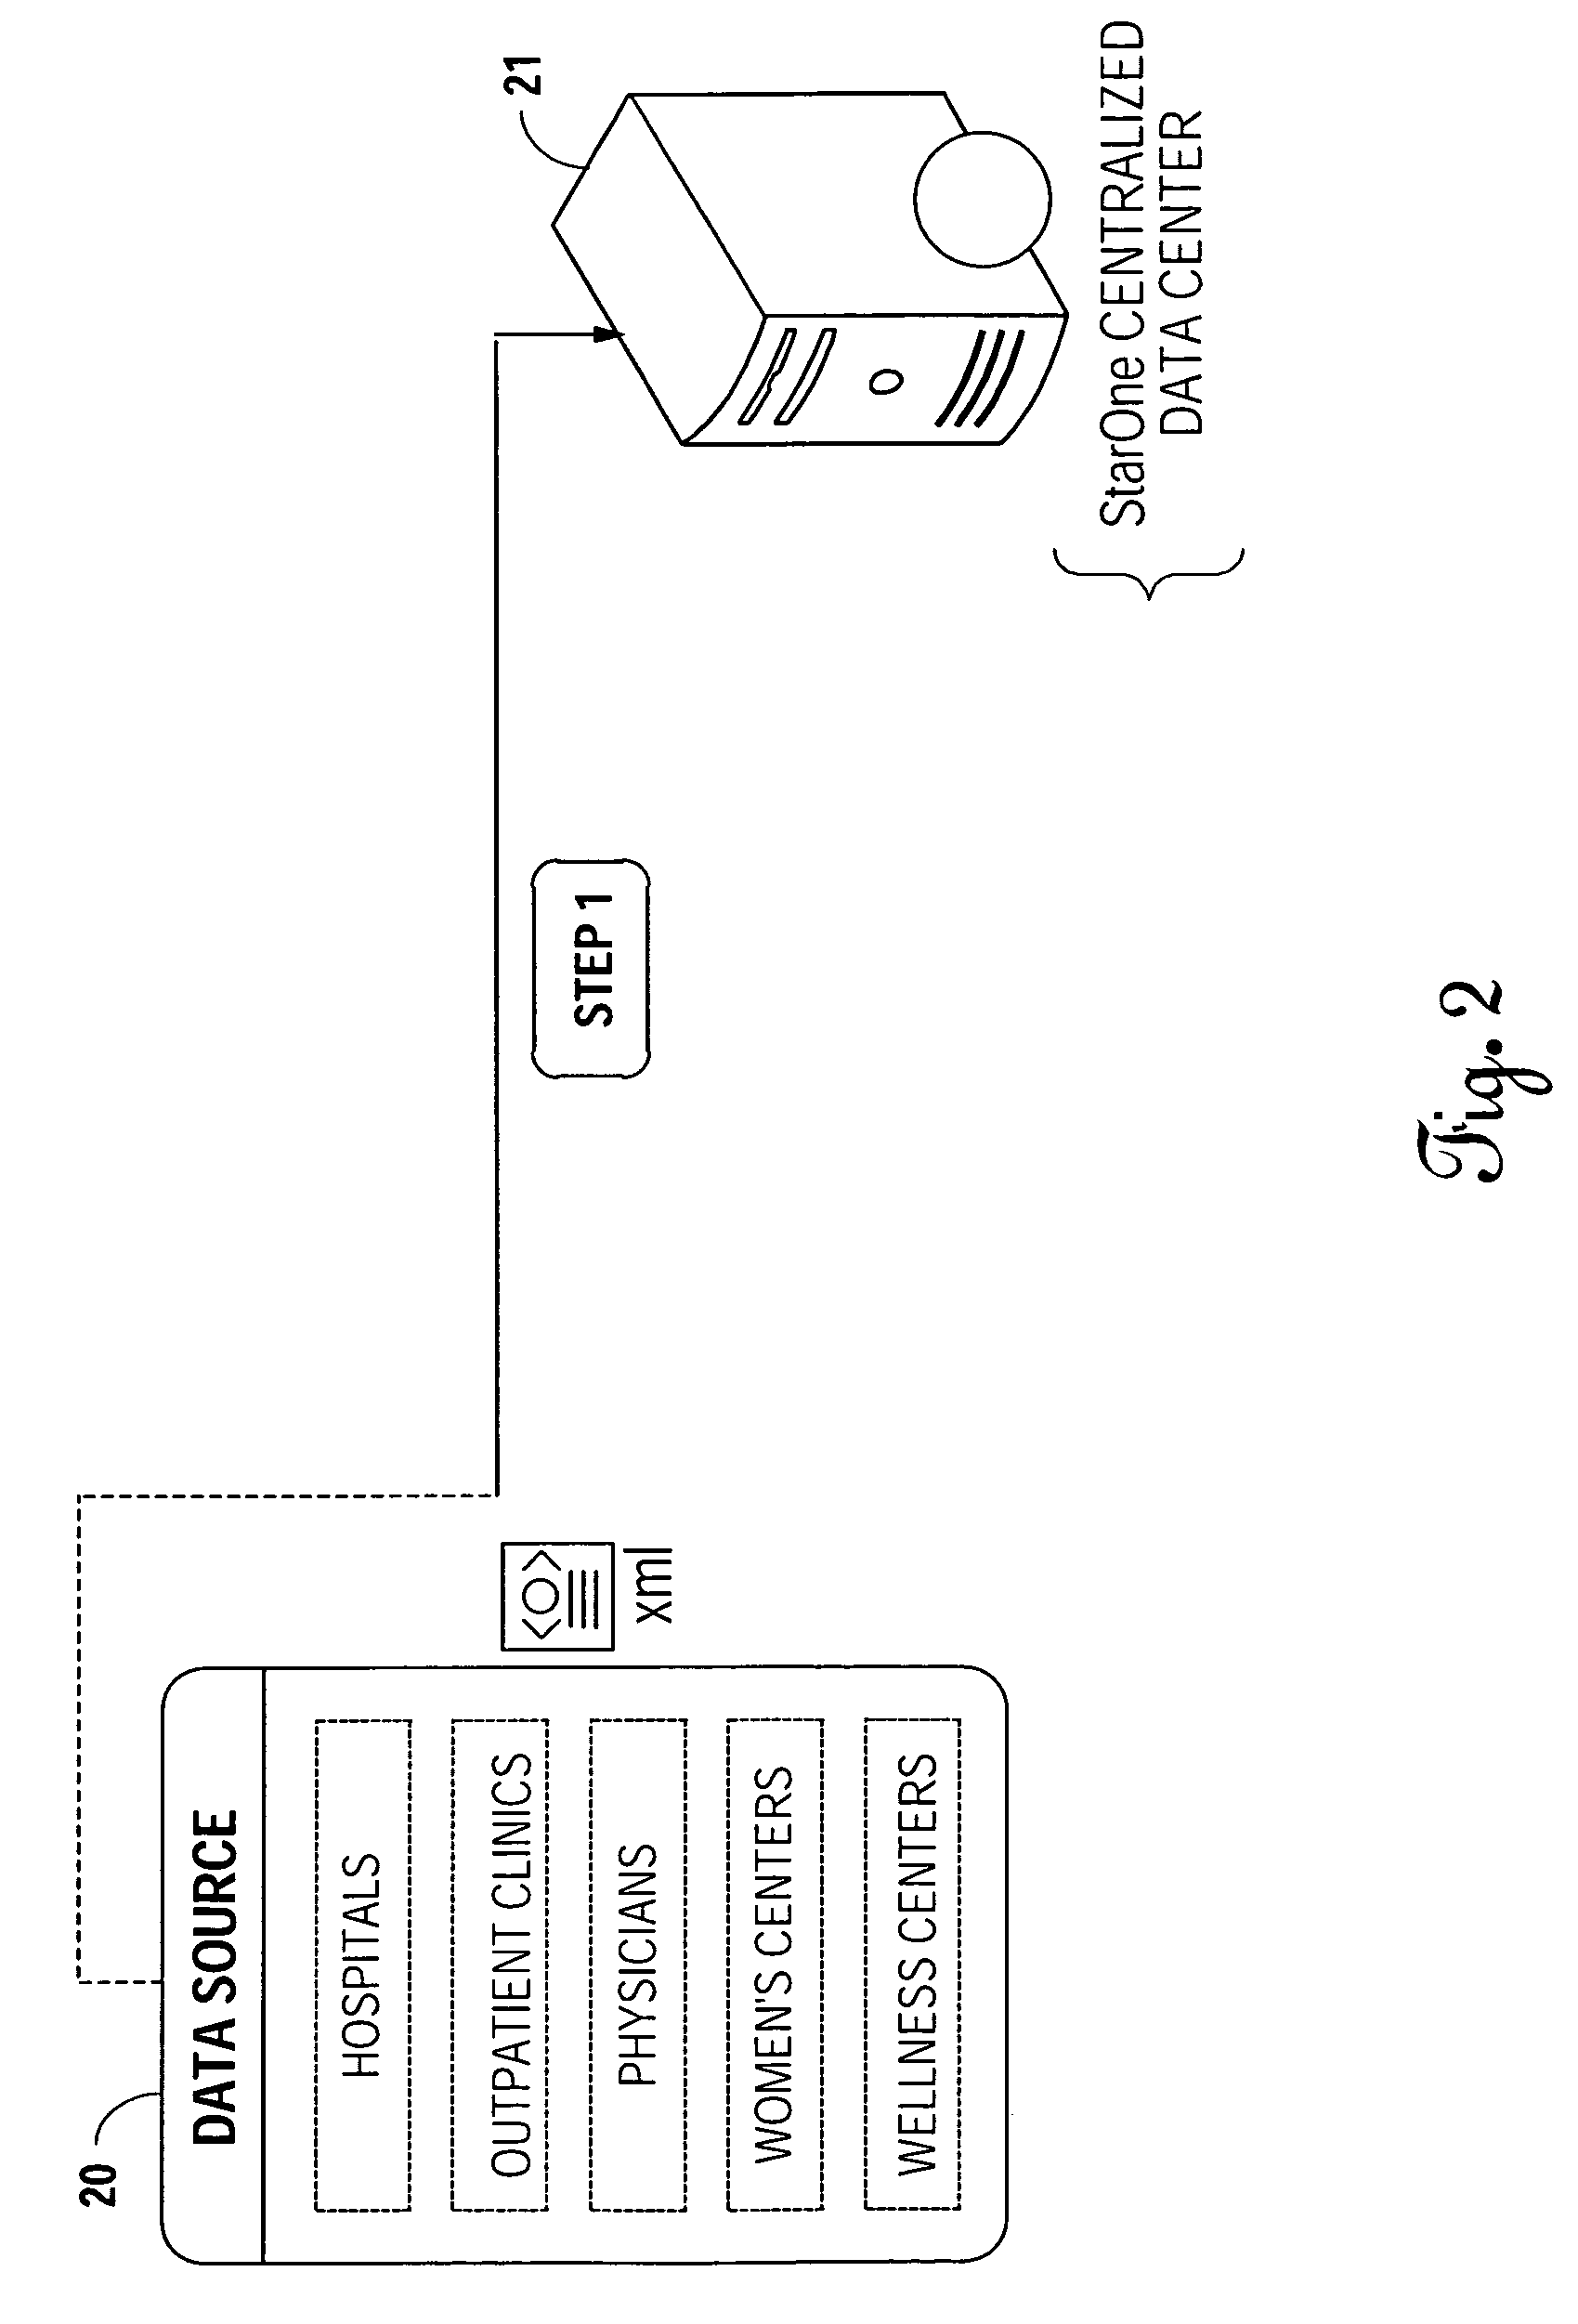 System and method for storage and dissemination of personal health information